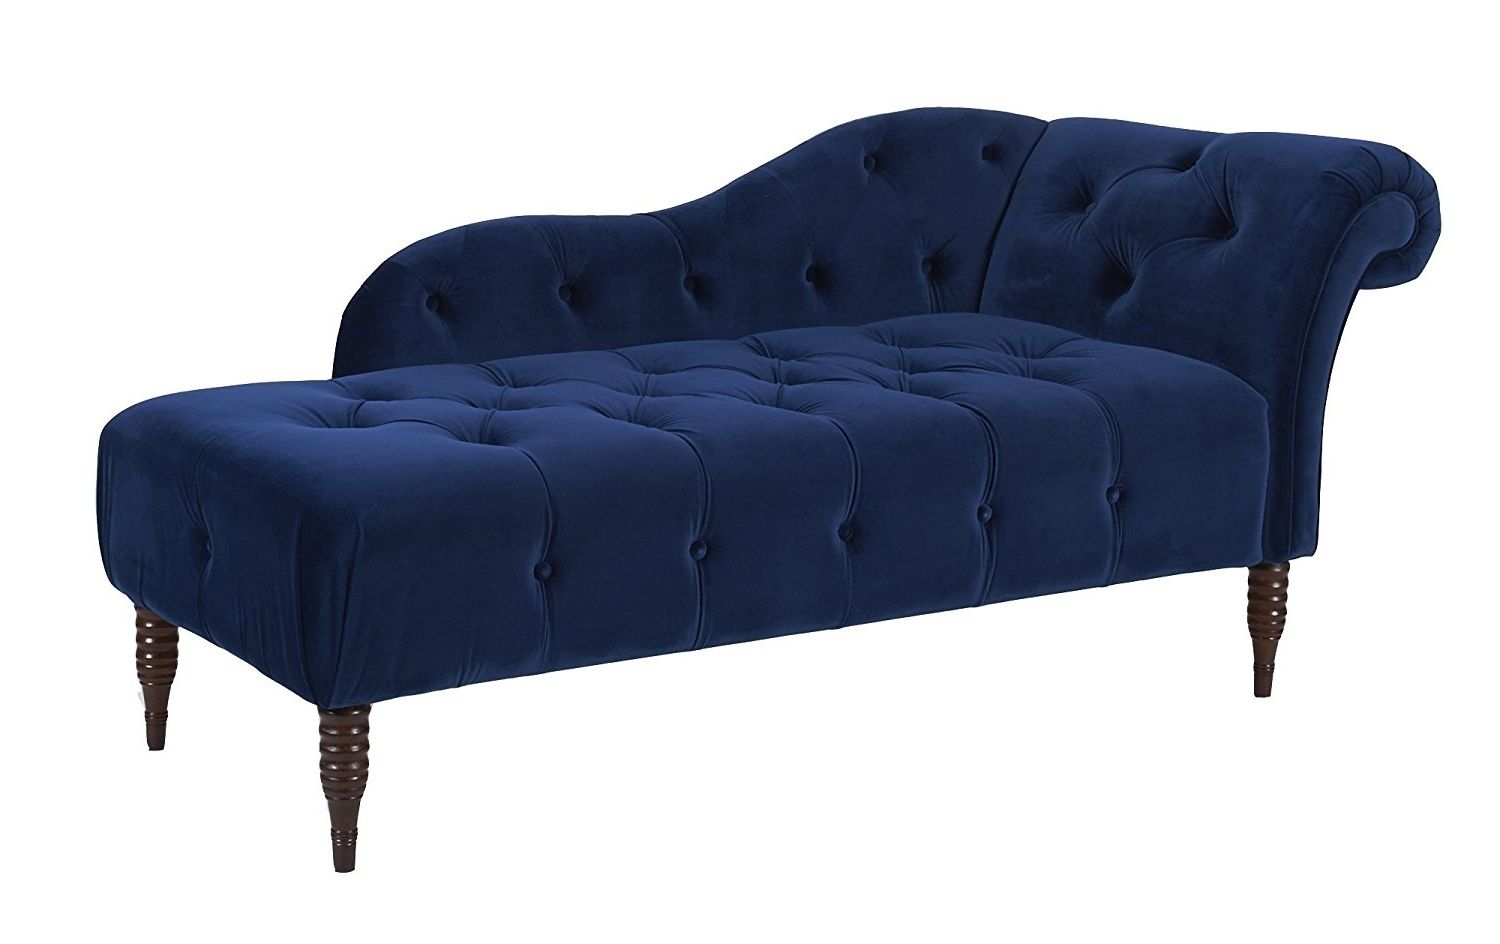 Blue Chaise Lounges Pertaining To 2018 Amazon: Jennifer Taylor Home, Chaise Lounge, Right Arm Facing (View 10 of 15)